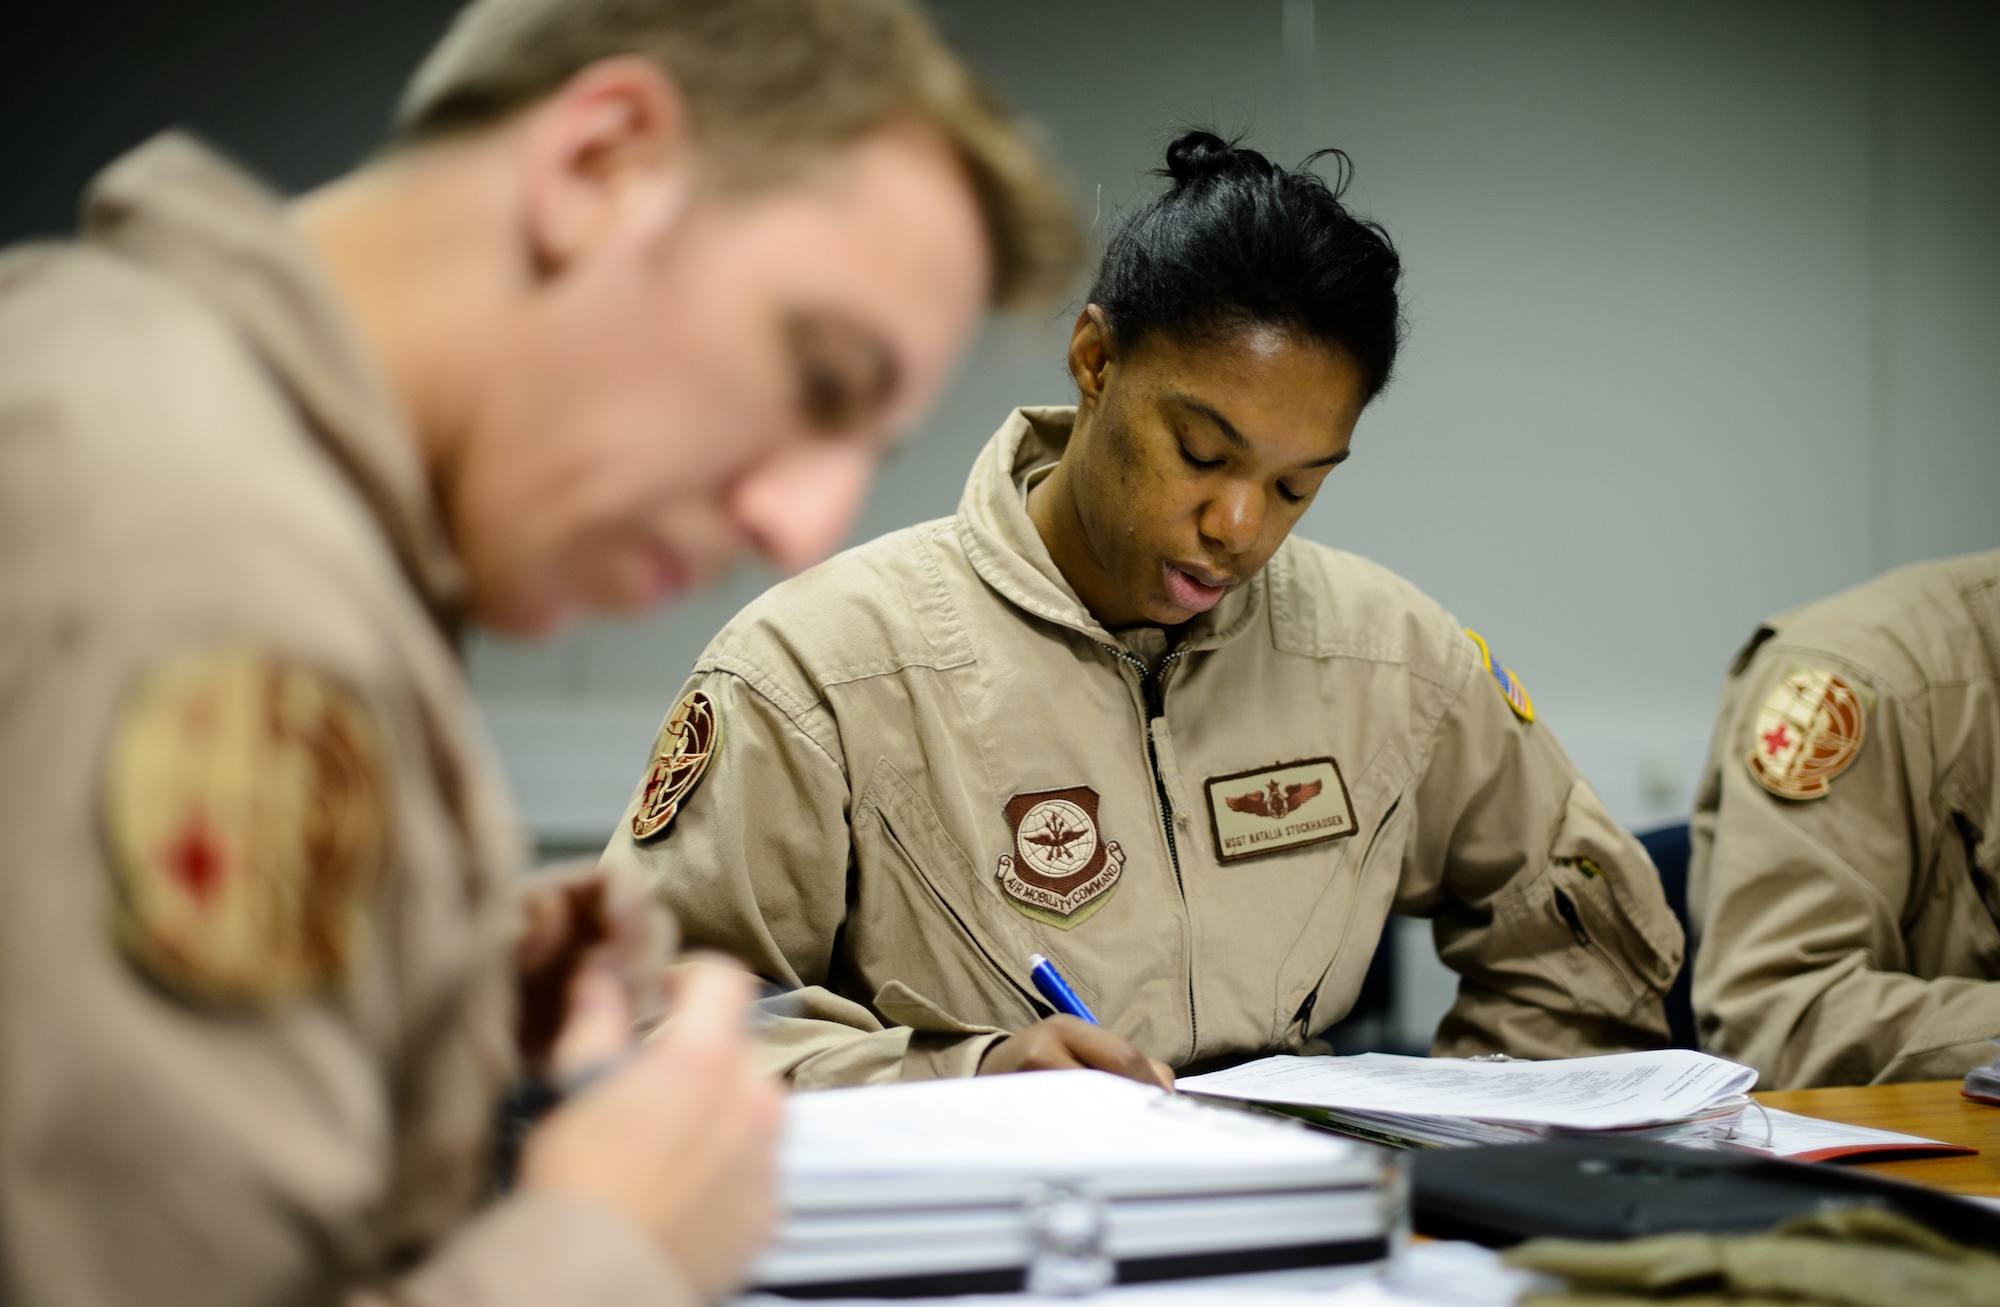 Master Sgt. Natalia Stockhausen, center, and Senior Airman Ryan Rieth, both 10th Expeditionary Aeromedical Evacuation Flight technicians, review a patient’s status prior to performing an evacuation flight Nov. 10, 2015, at Ramstein Air Base, Germany. Technicians, nurses and doctors fly constantly to various areas of operation to return patients to hospitals in Germany or the U.S. for further treatment. (U.S. Air Force photo/Staff Sgt. Armando A. Schwier-Morales)